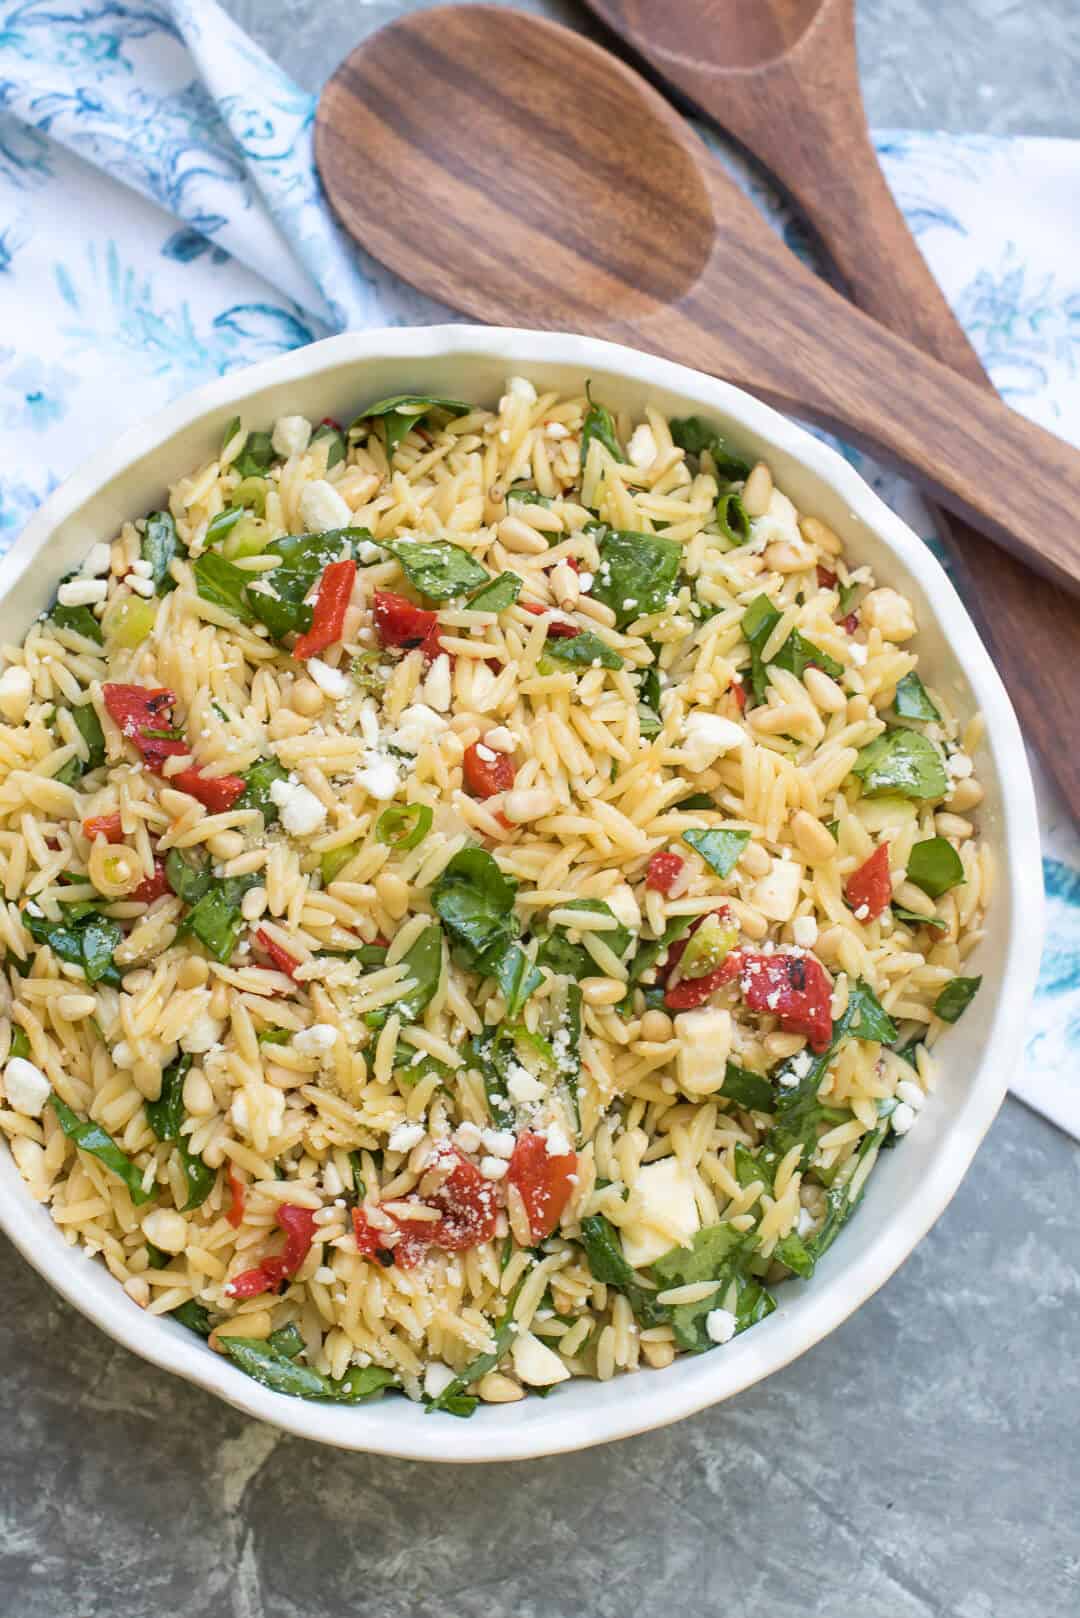 An over the top image of Orzo Salad with Roasted Red Peppers, Spinach, and Feta in a white serving bowl with wooden serving spoons in the background.